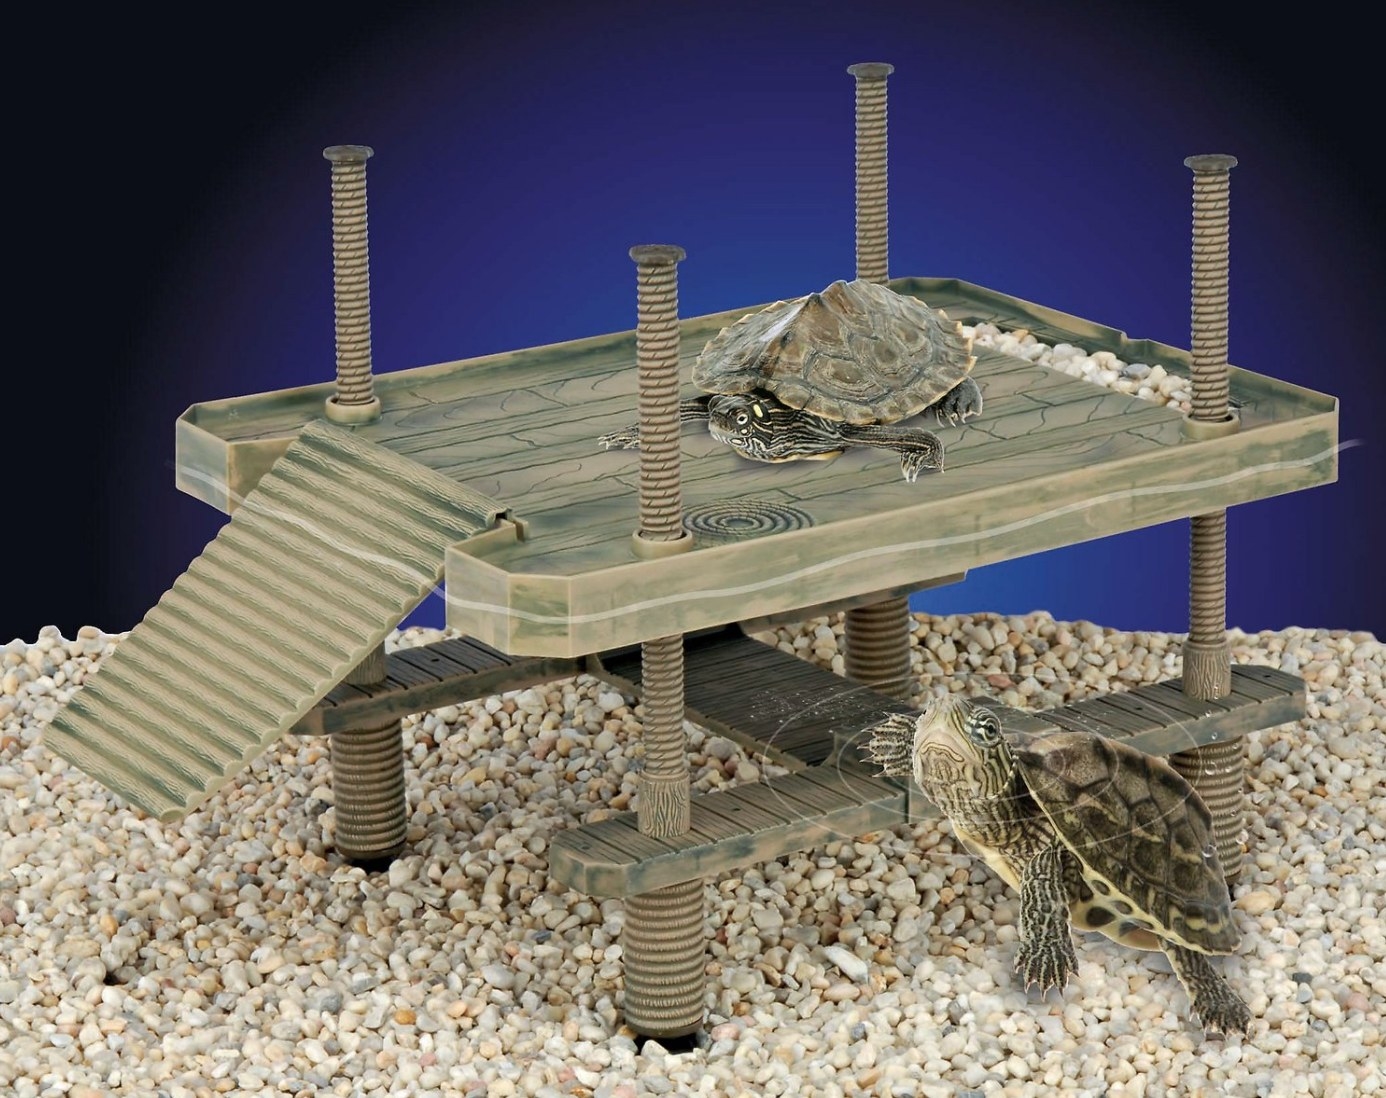 The two tier platform has a ramp and two small turtles enjoying the structure